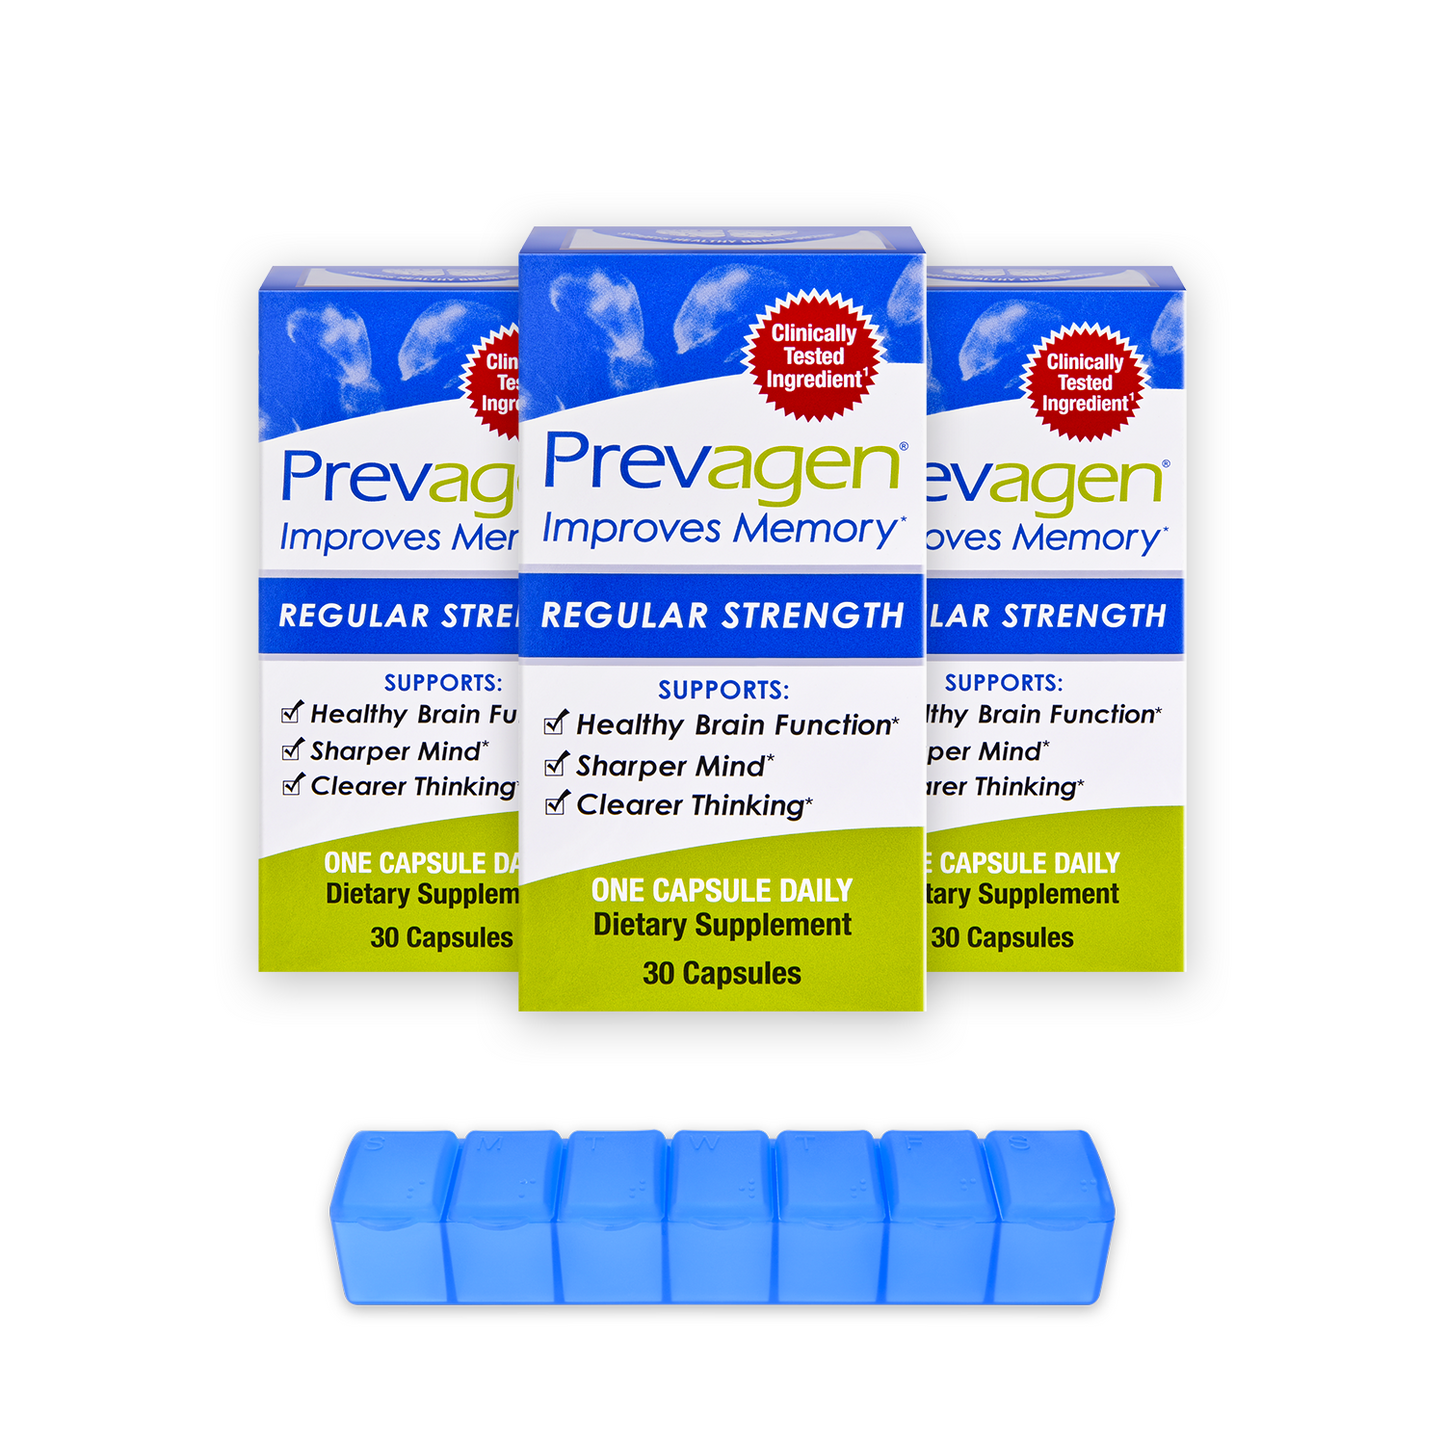 Prevagen® 10mg, 30 Capsules (3-Pack) with Prevagen 7-Day Pill Minder